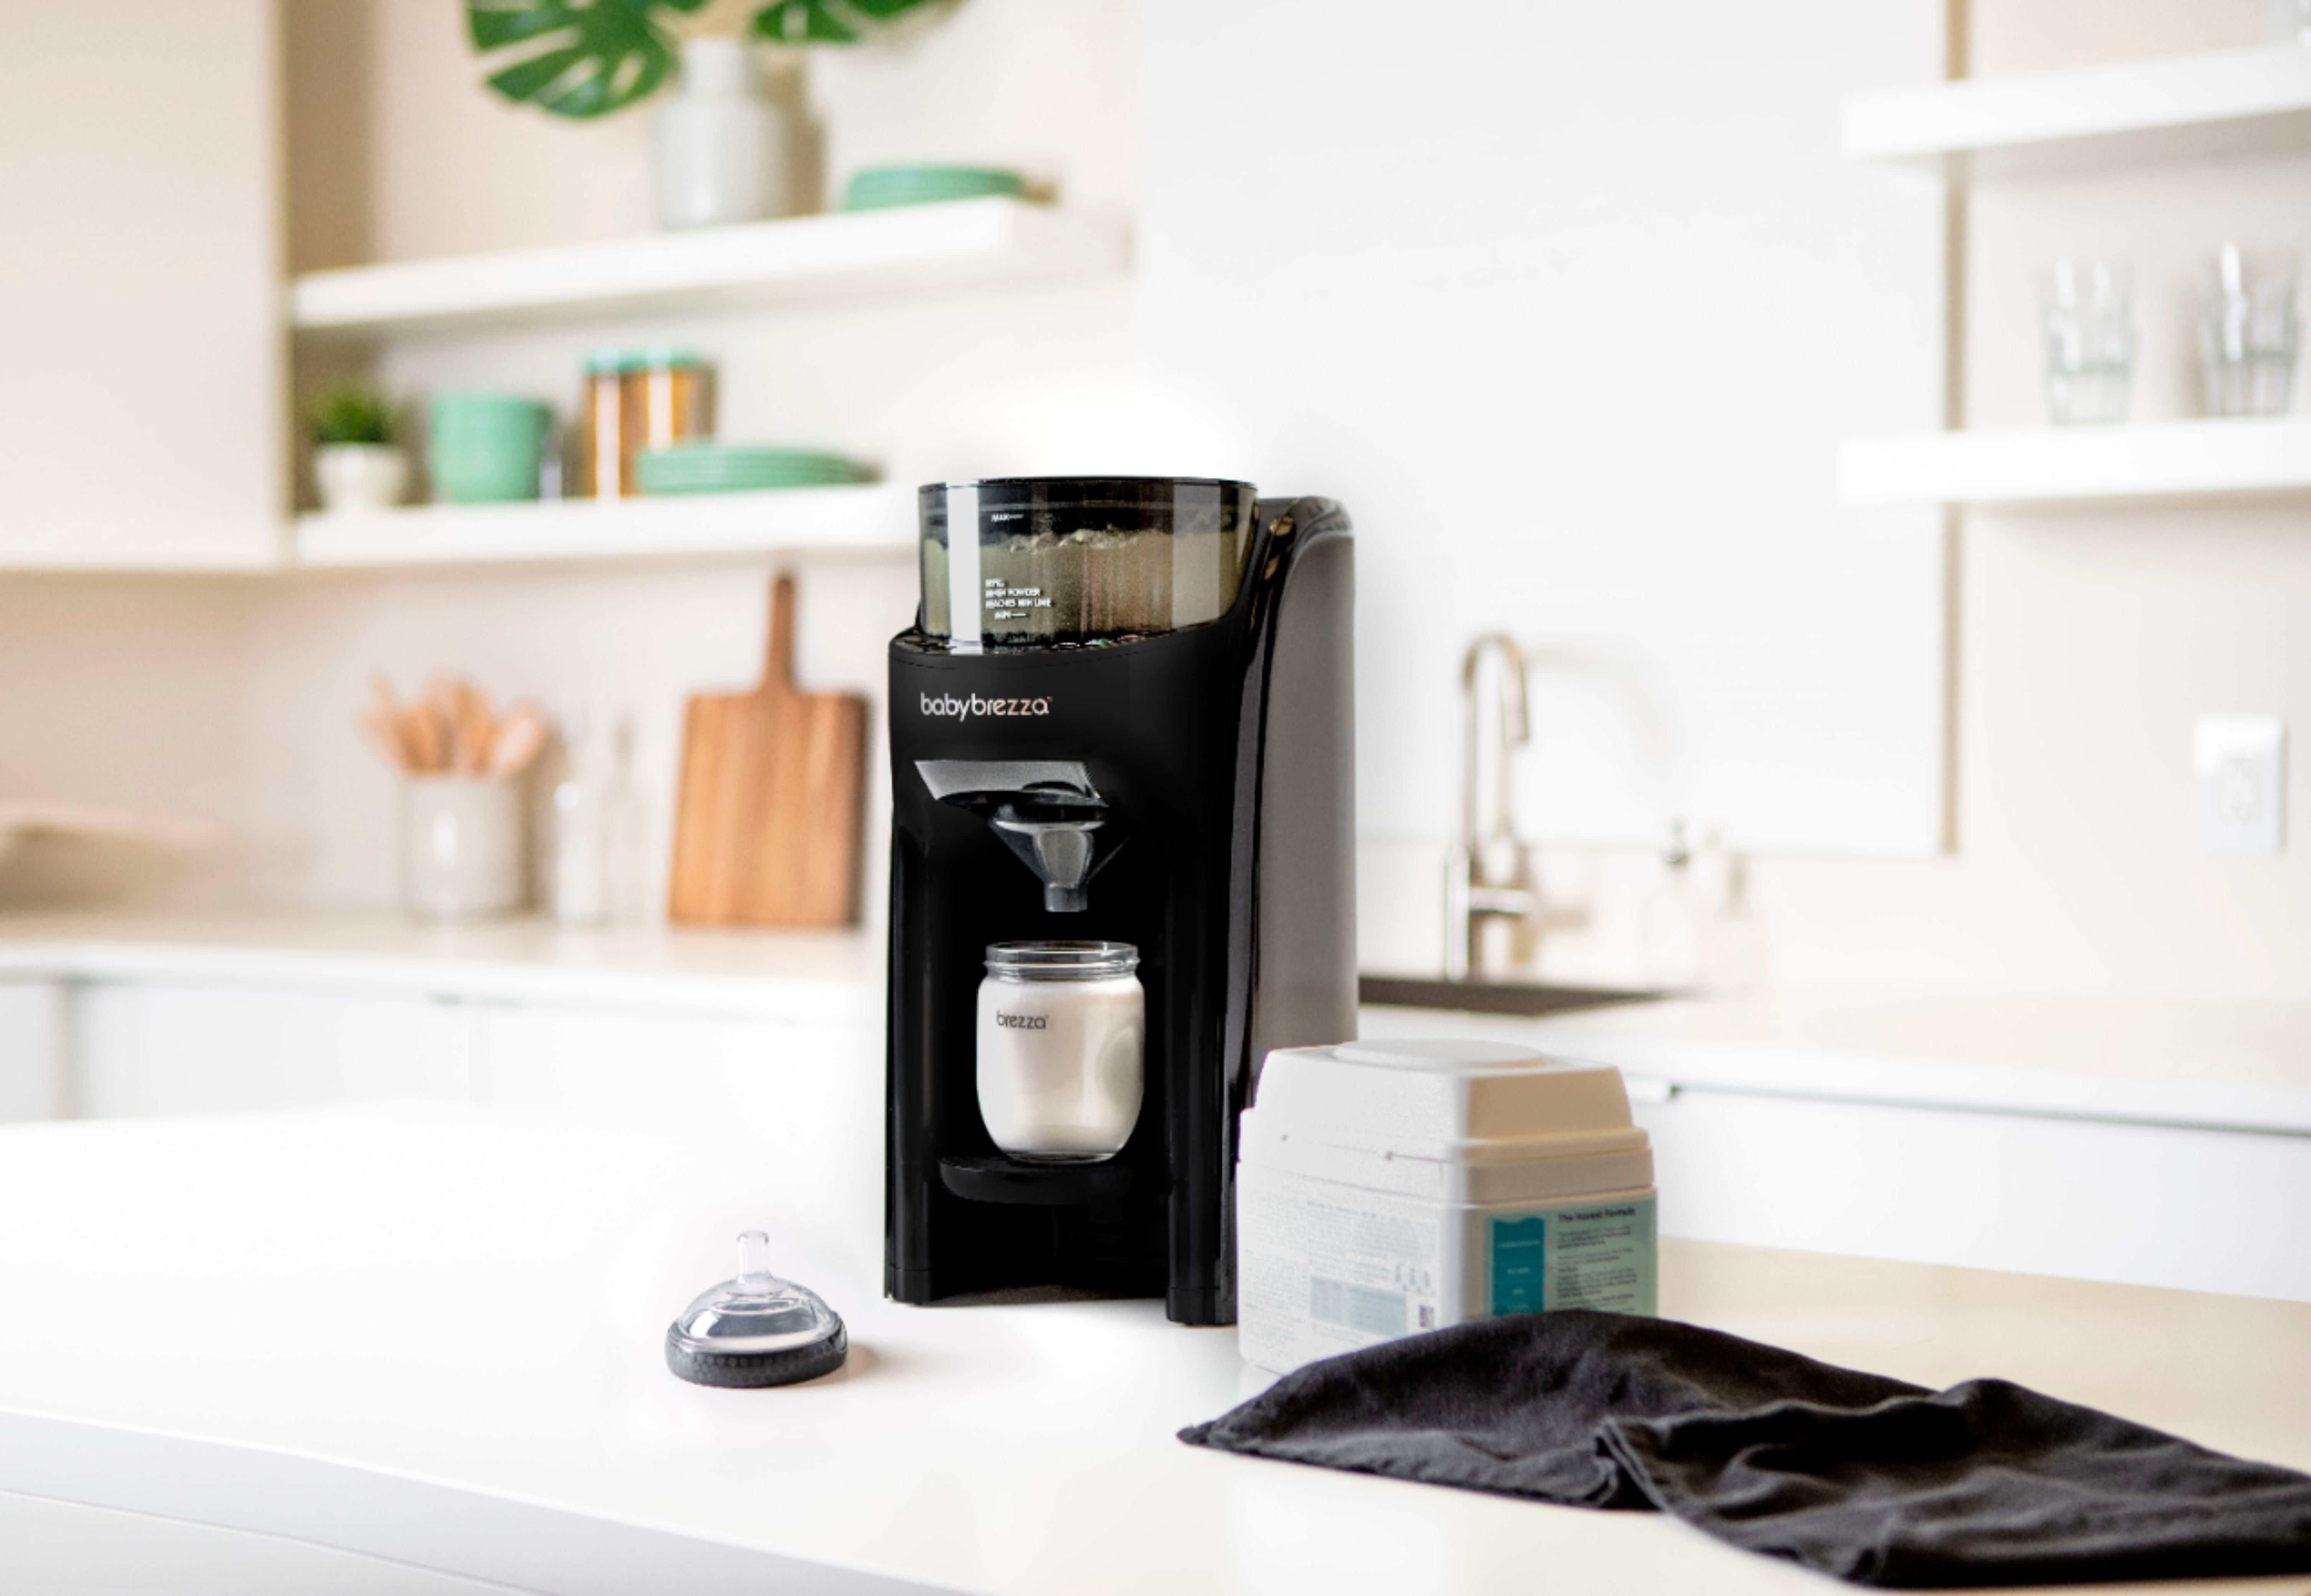 Baby Brezza Just Launched a WiFi Bottle Maker & It's a Game